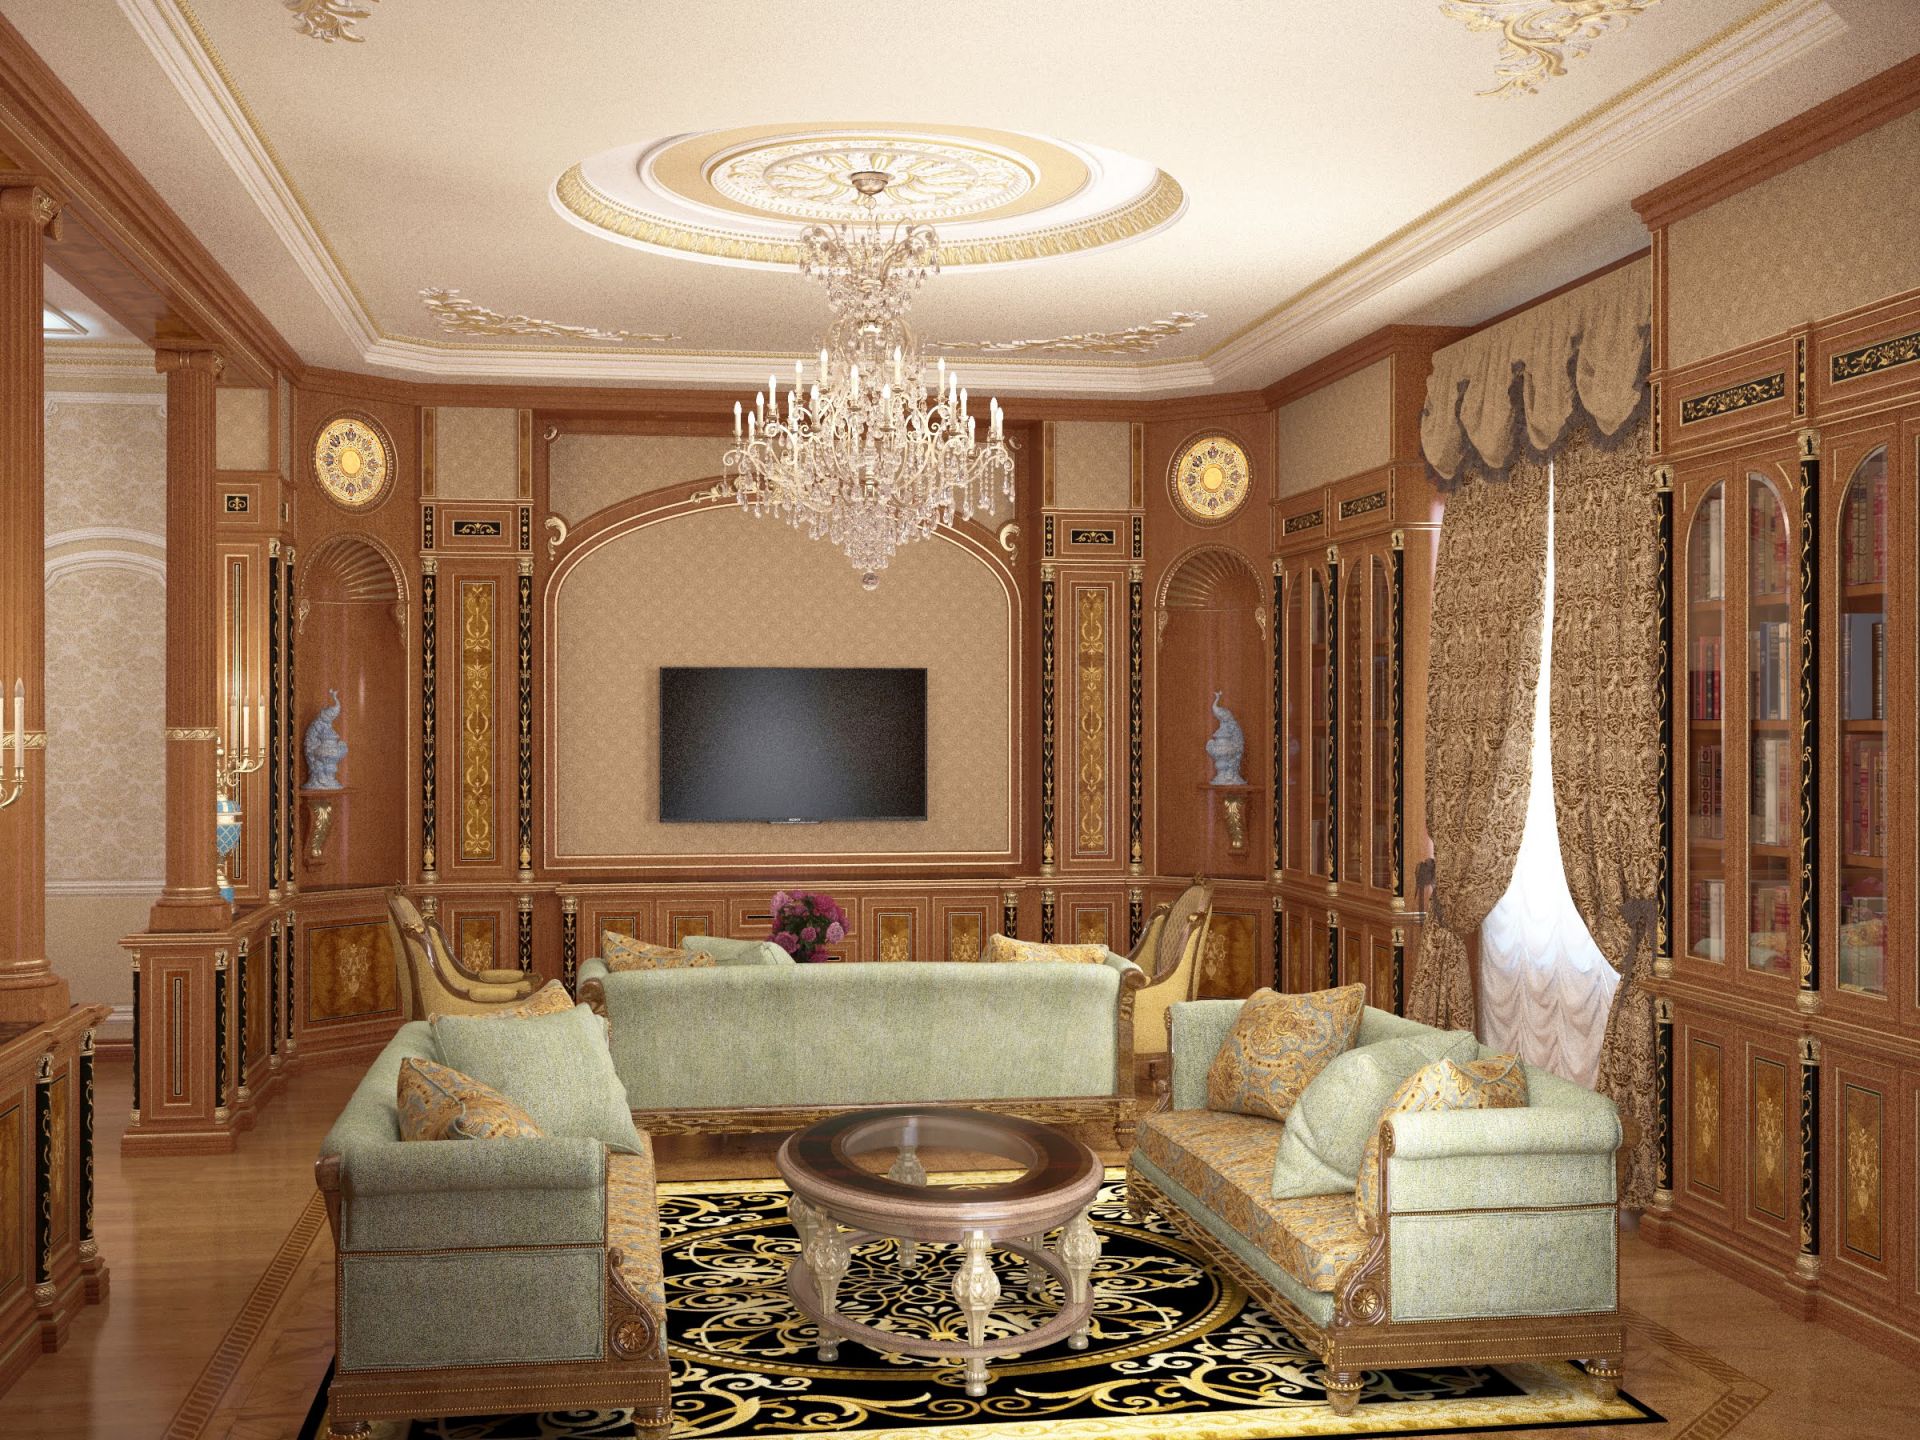 Living room in palace style